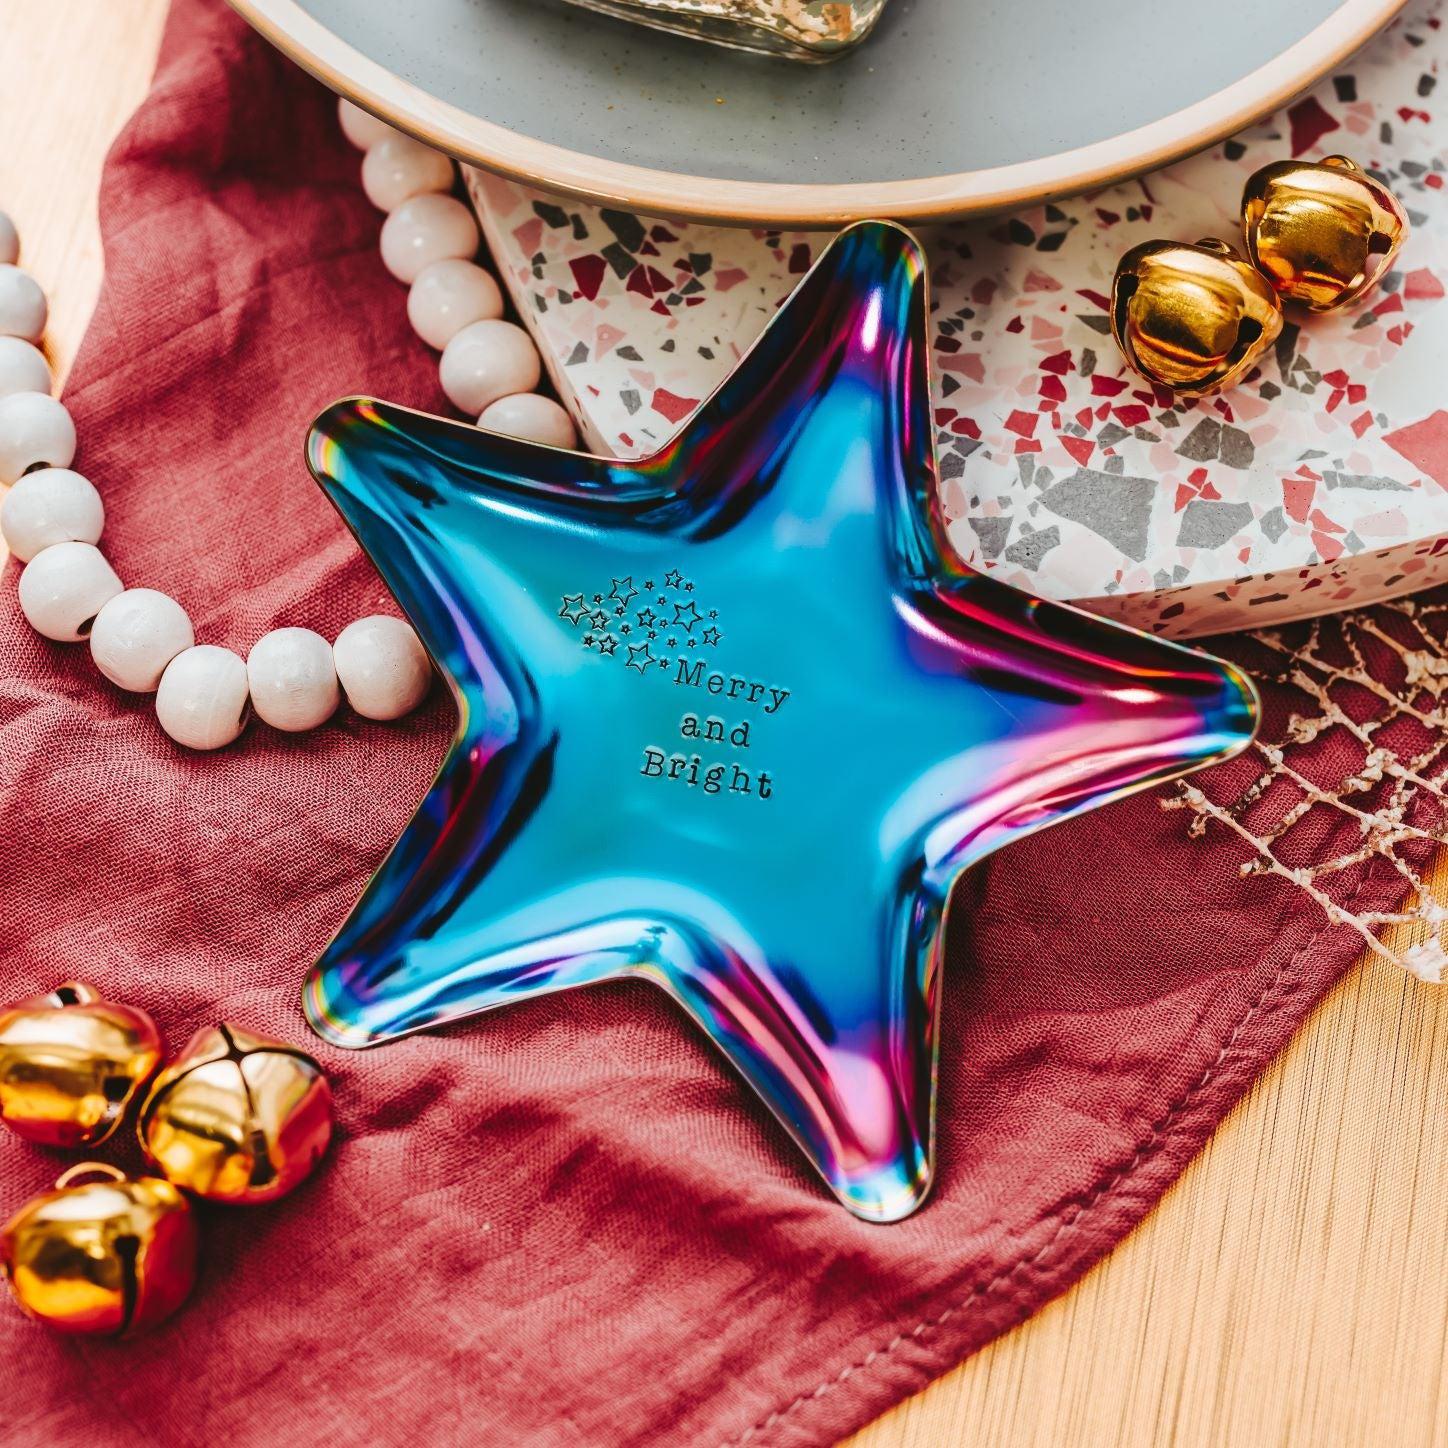 Merry and Bright Star Christmas Trinket Dish Salt and Sparkle